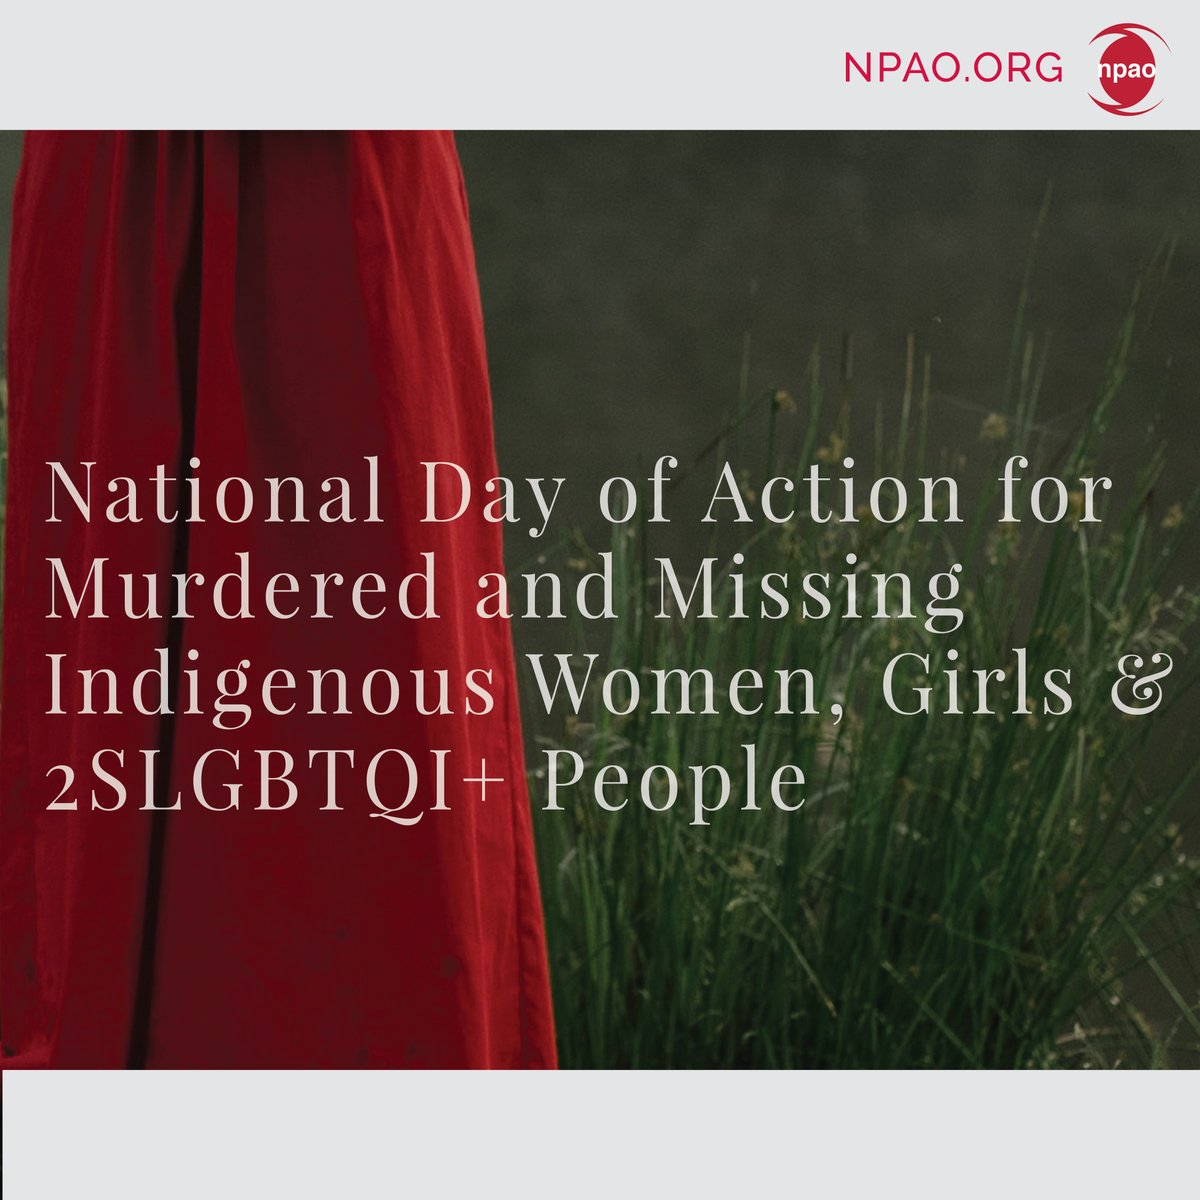 May 5th marks Red Dress Day, We honour and remember missing and murdered Indigenous women, girls, and 2SLGBTQQIA+ peoples. Let's stand in solidarity, acknowledging the ongoing genocidal crisis and committing to meaningful action. #RedDressDay